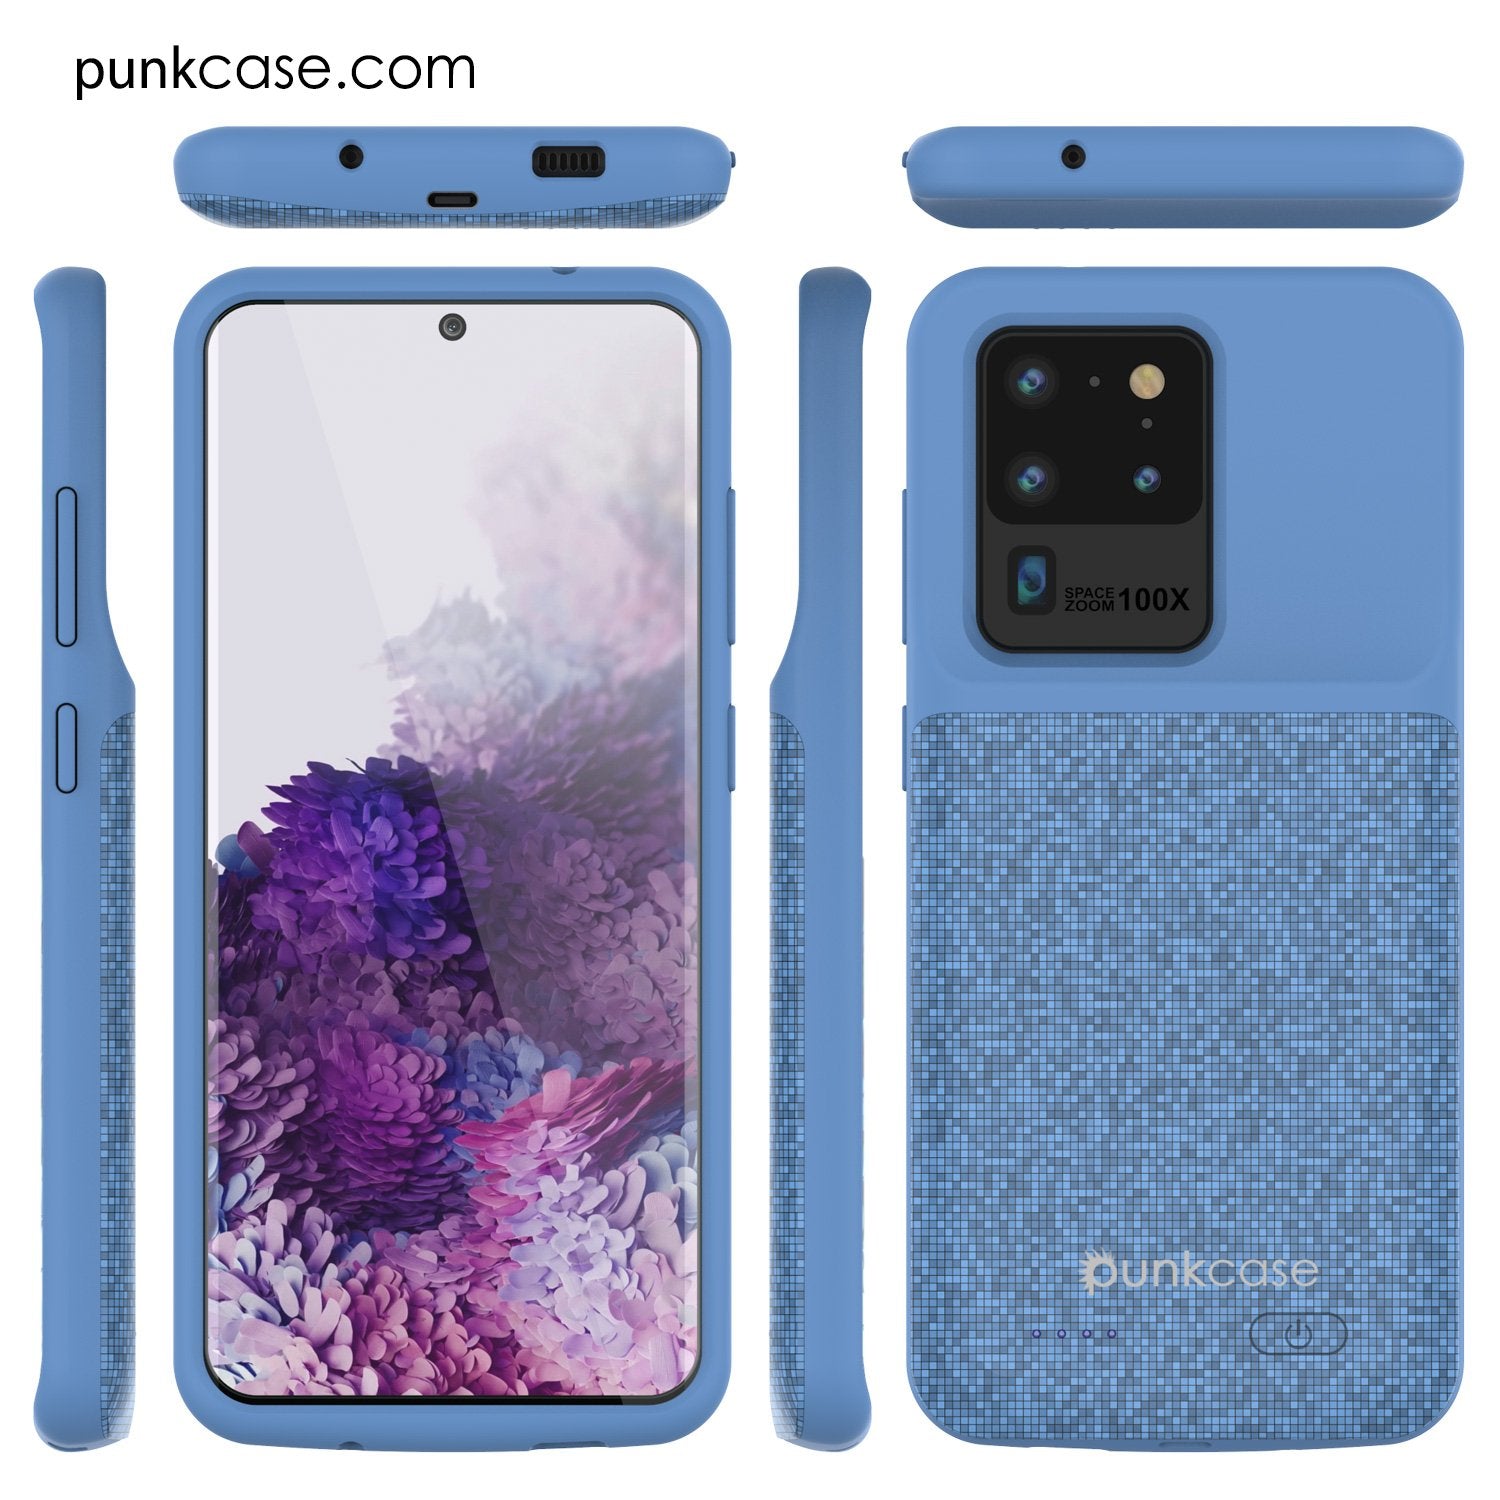 PunkJuice S20 Ultra Battery Case Patterned Blue - Fast Charging Power Juice Bank with 6000mAh (Color in image: Patterned Blue)